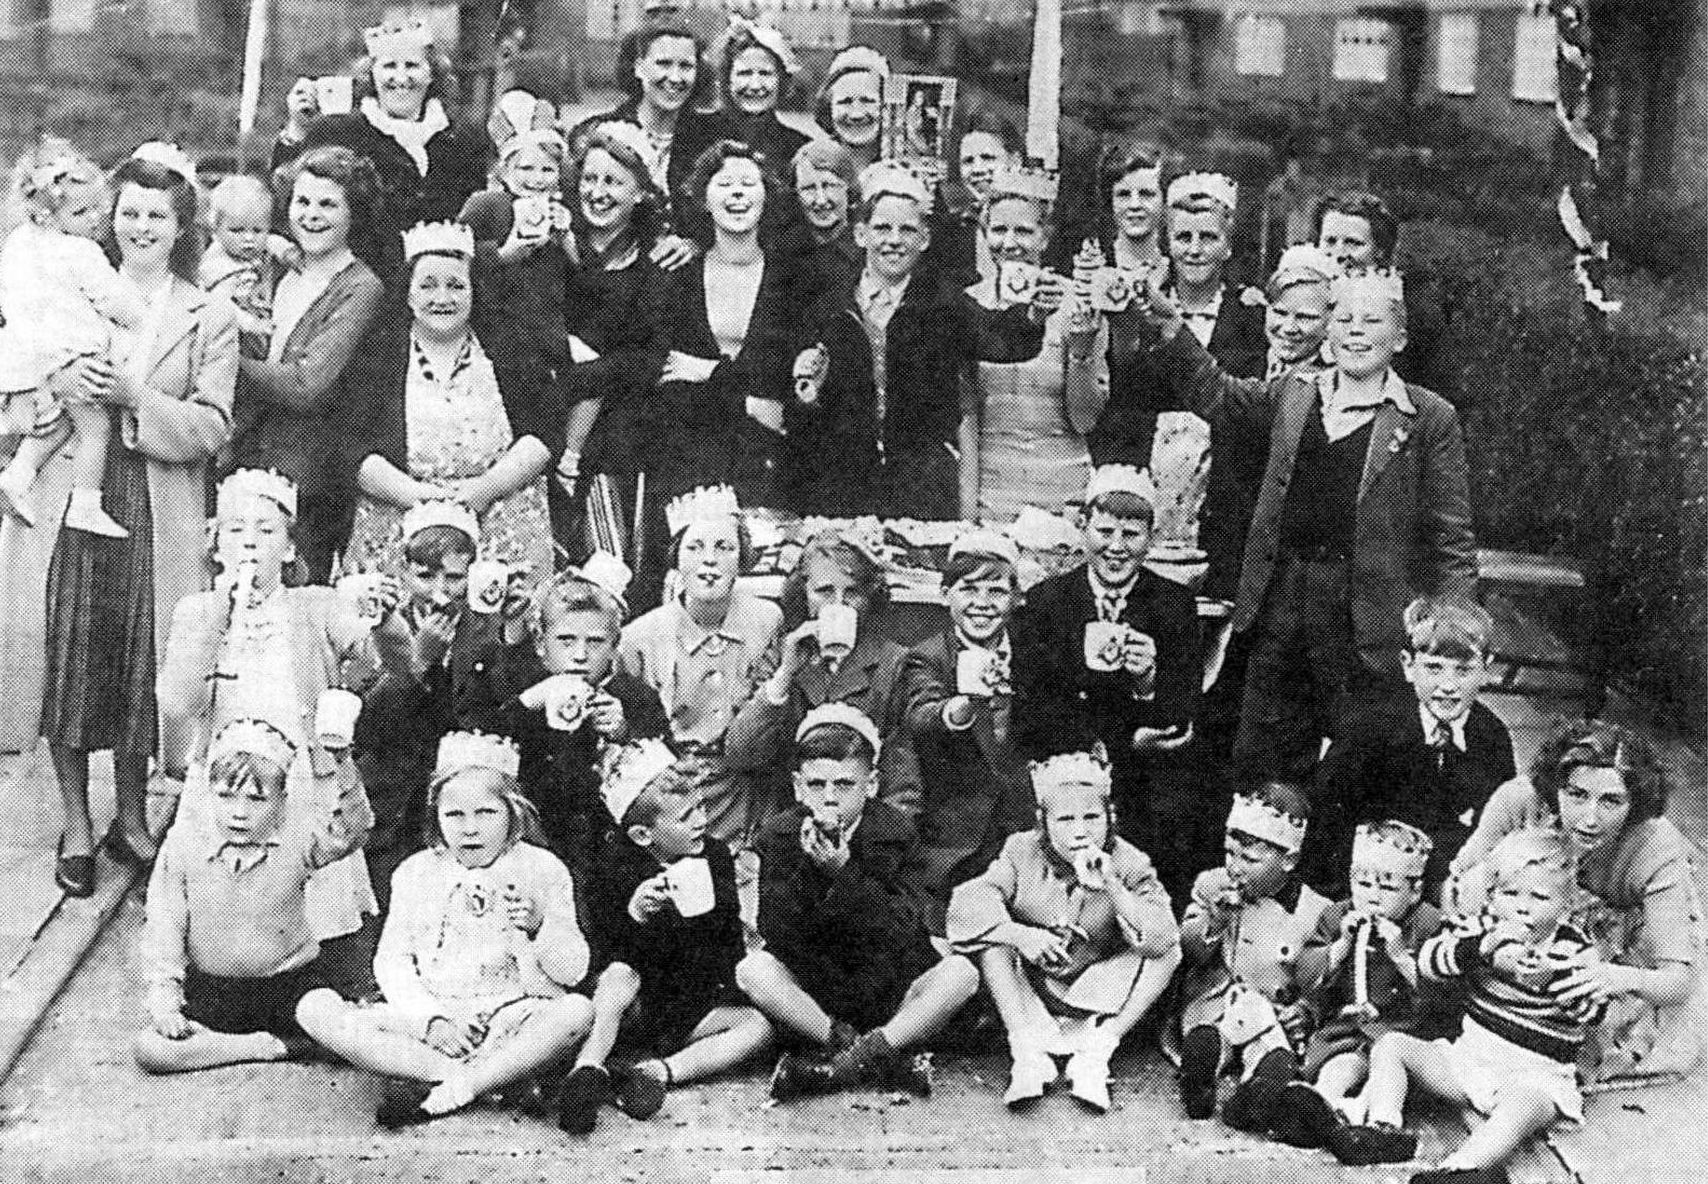 A Coronation street party in Central Avenue in Birkdale in Southport